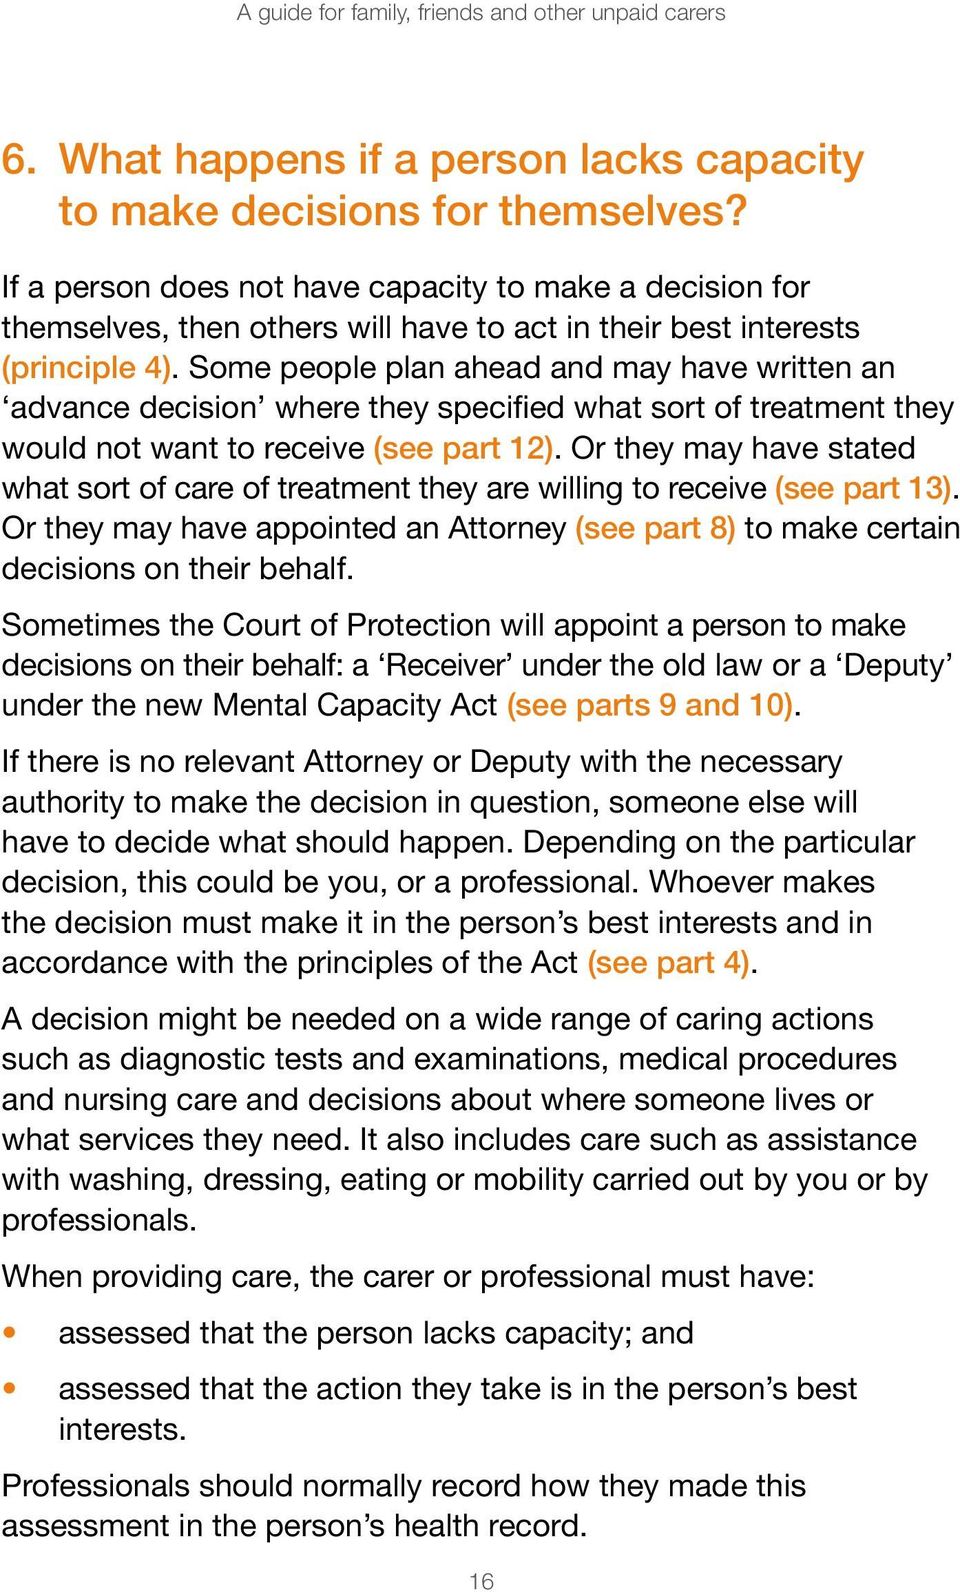 Some people plan ahead and may have written an advance decision where they specified what sort of treatment they would not want to receive (see part 12).